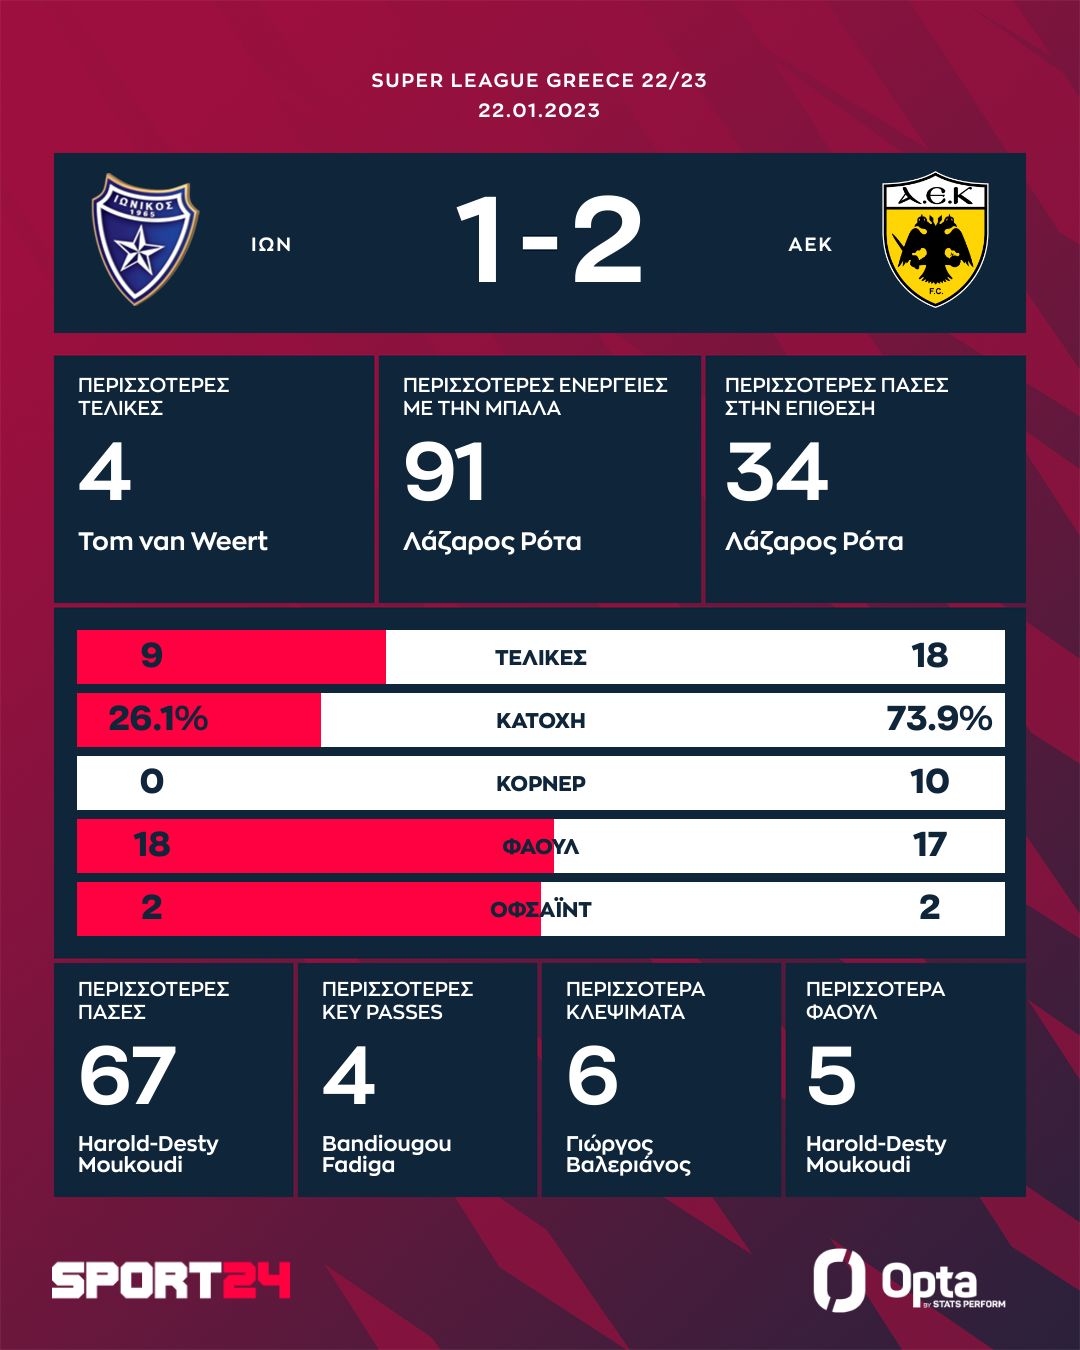 ion-aek-stats.png